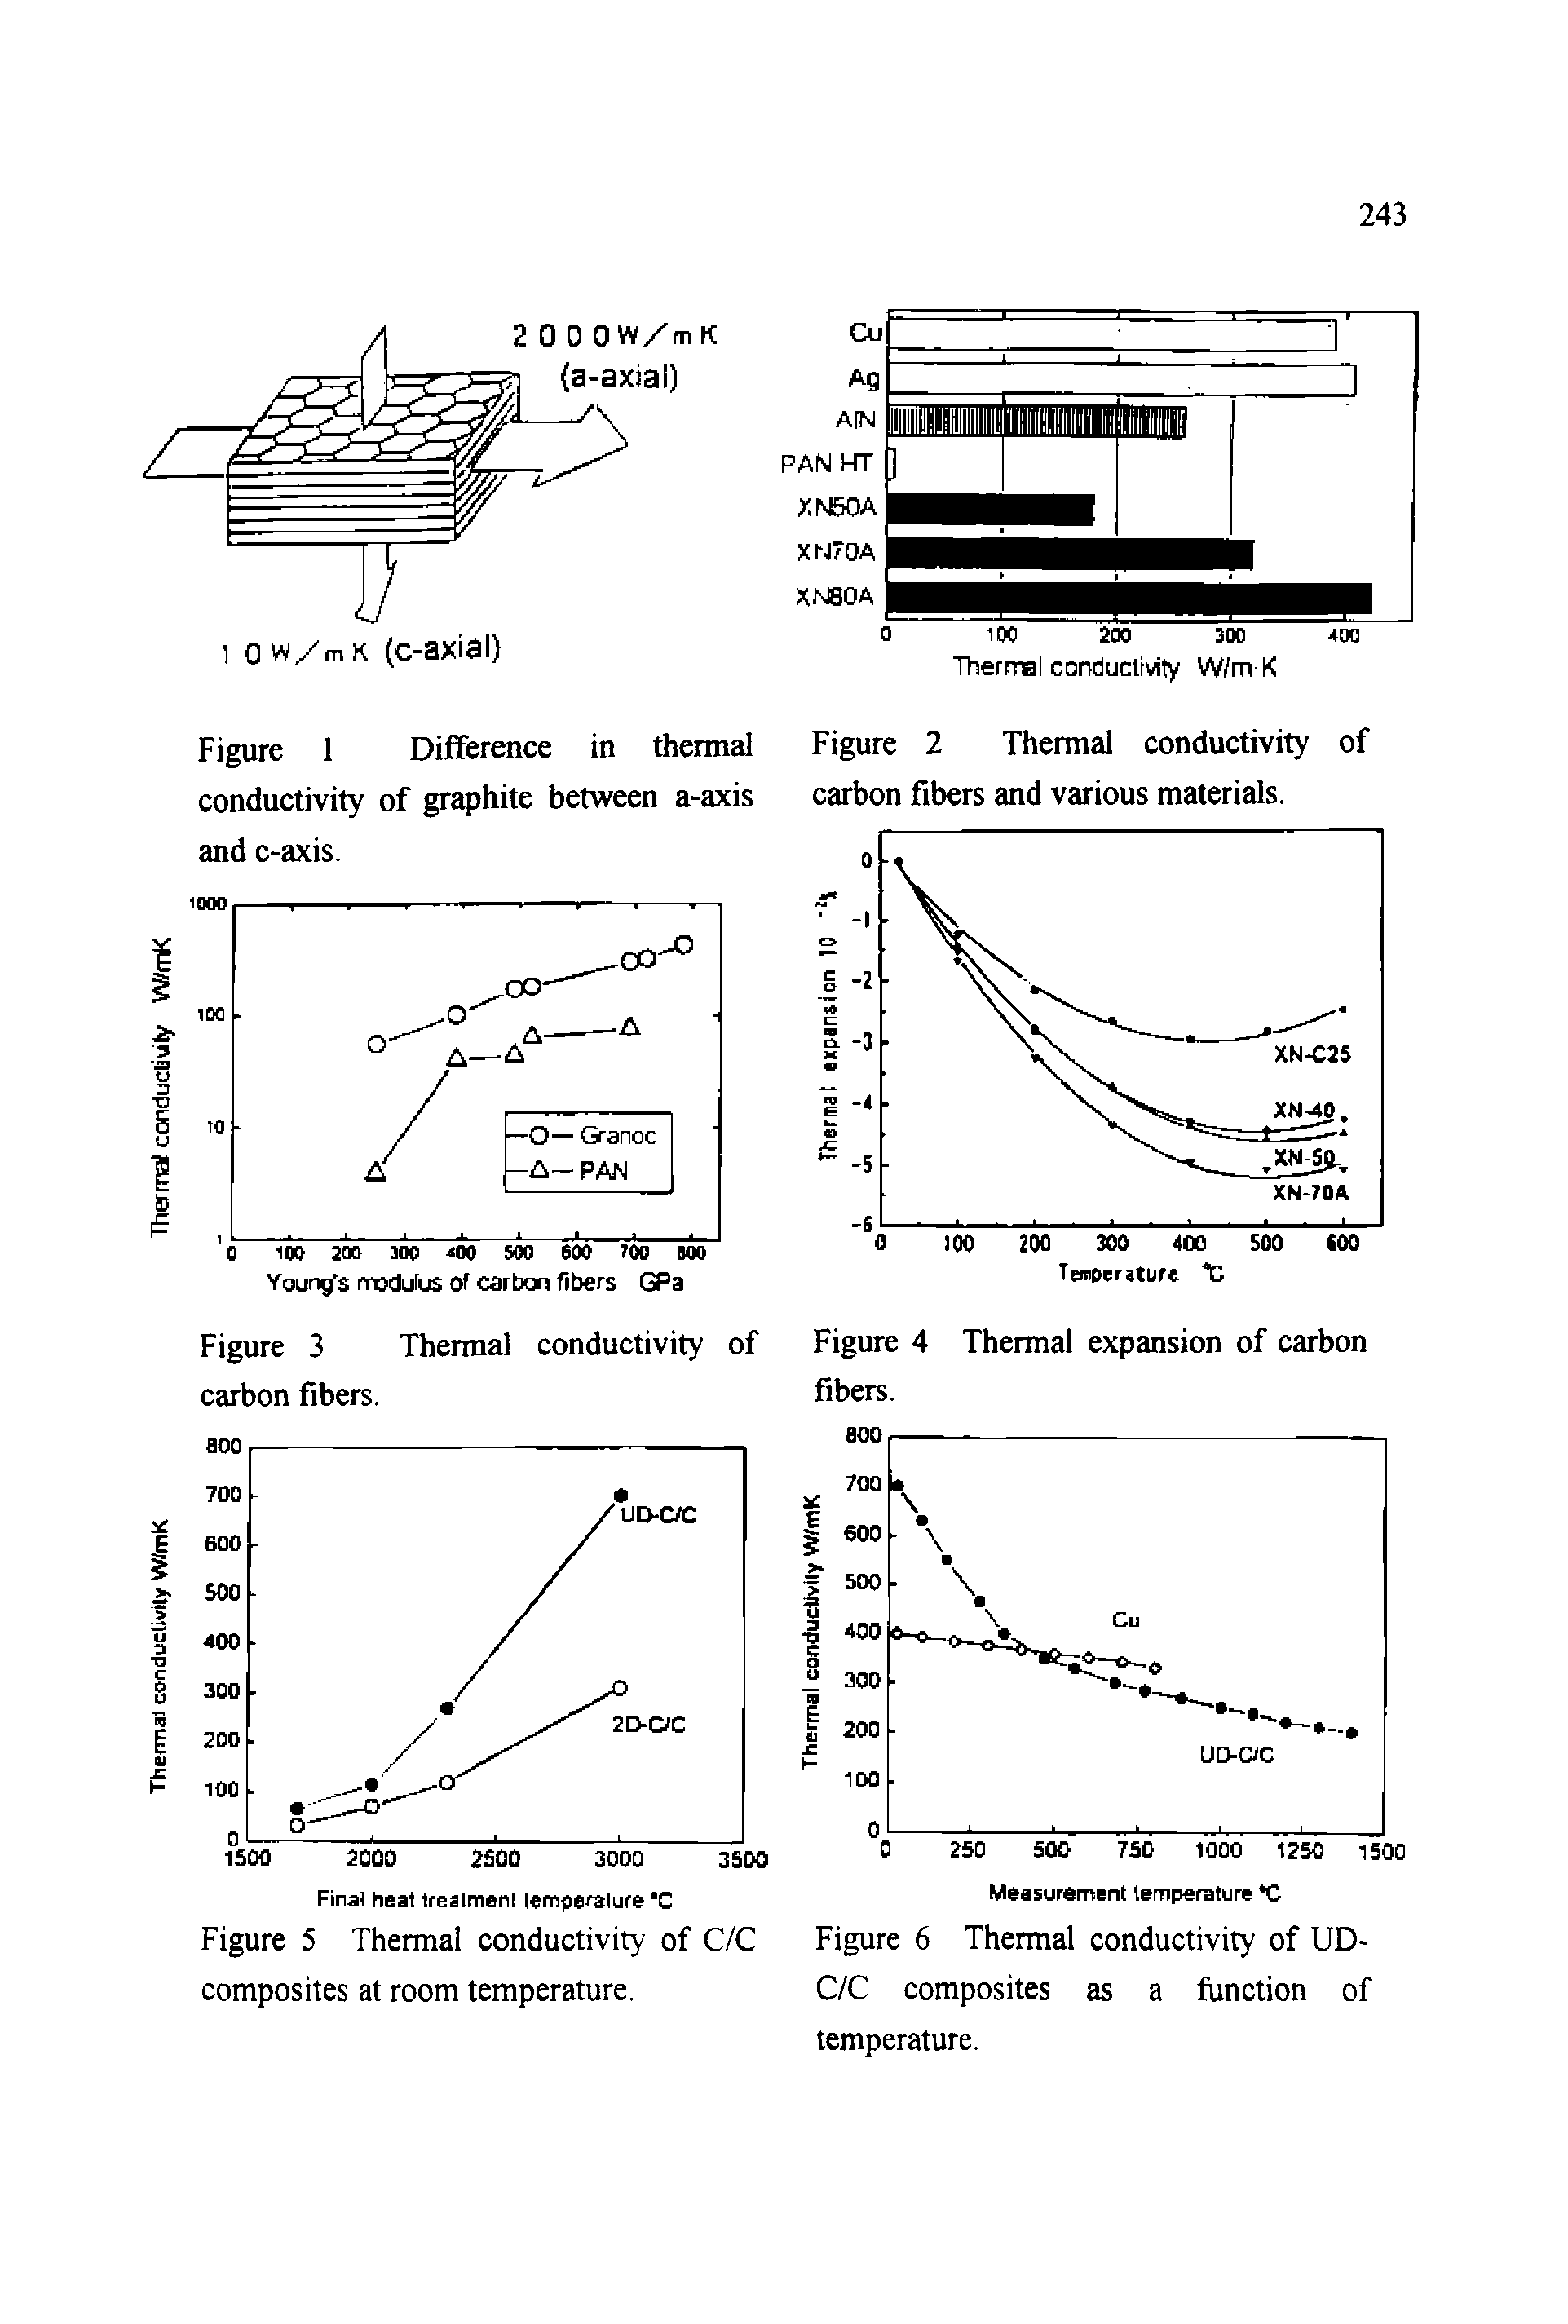 Figure 2 Thermal conductivity of carbon fibers and various materials.